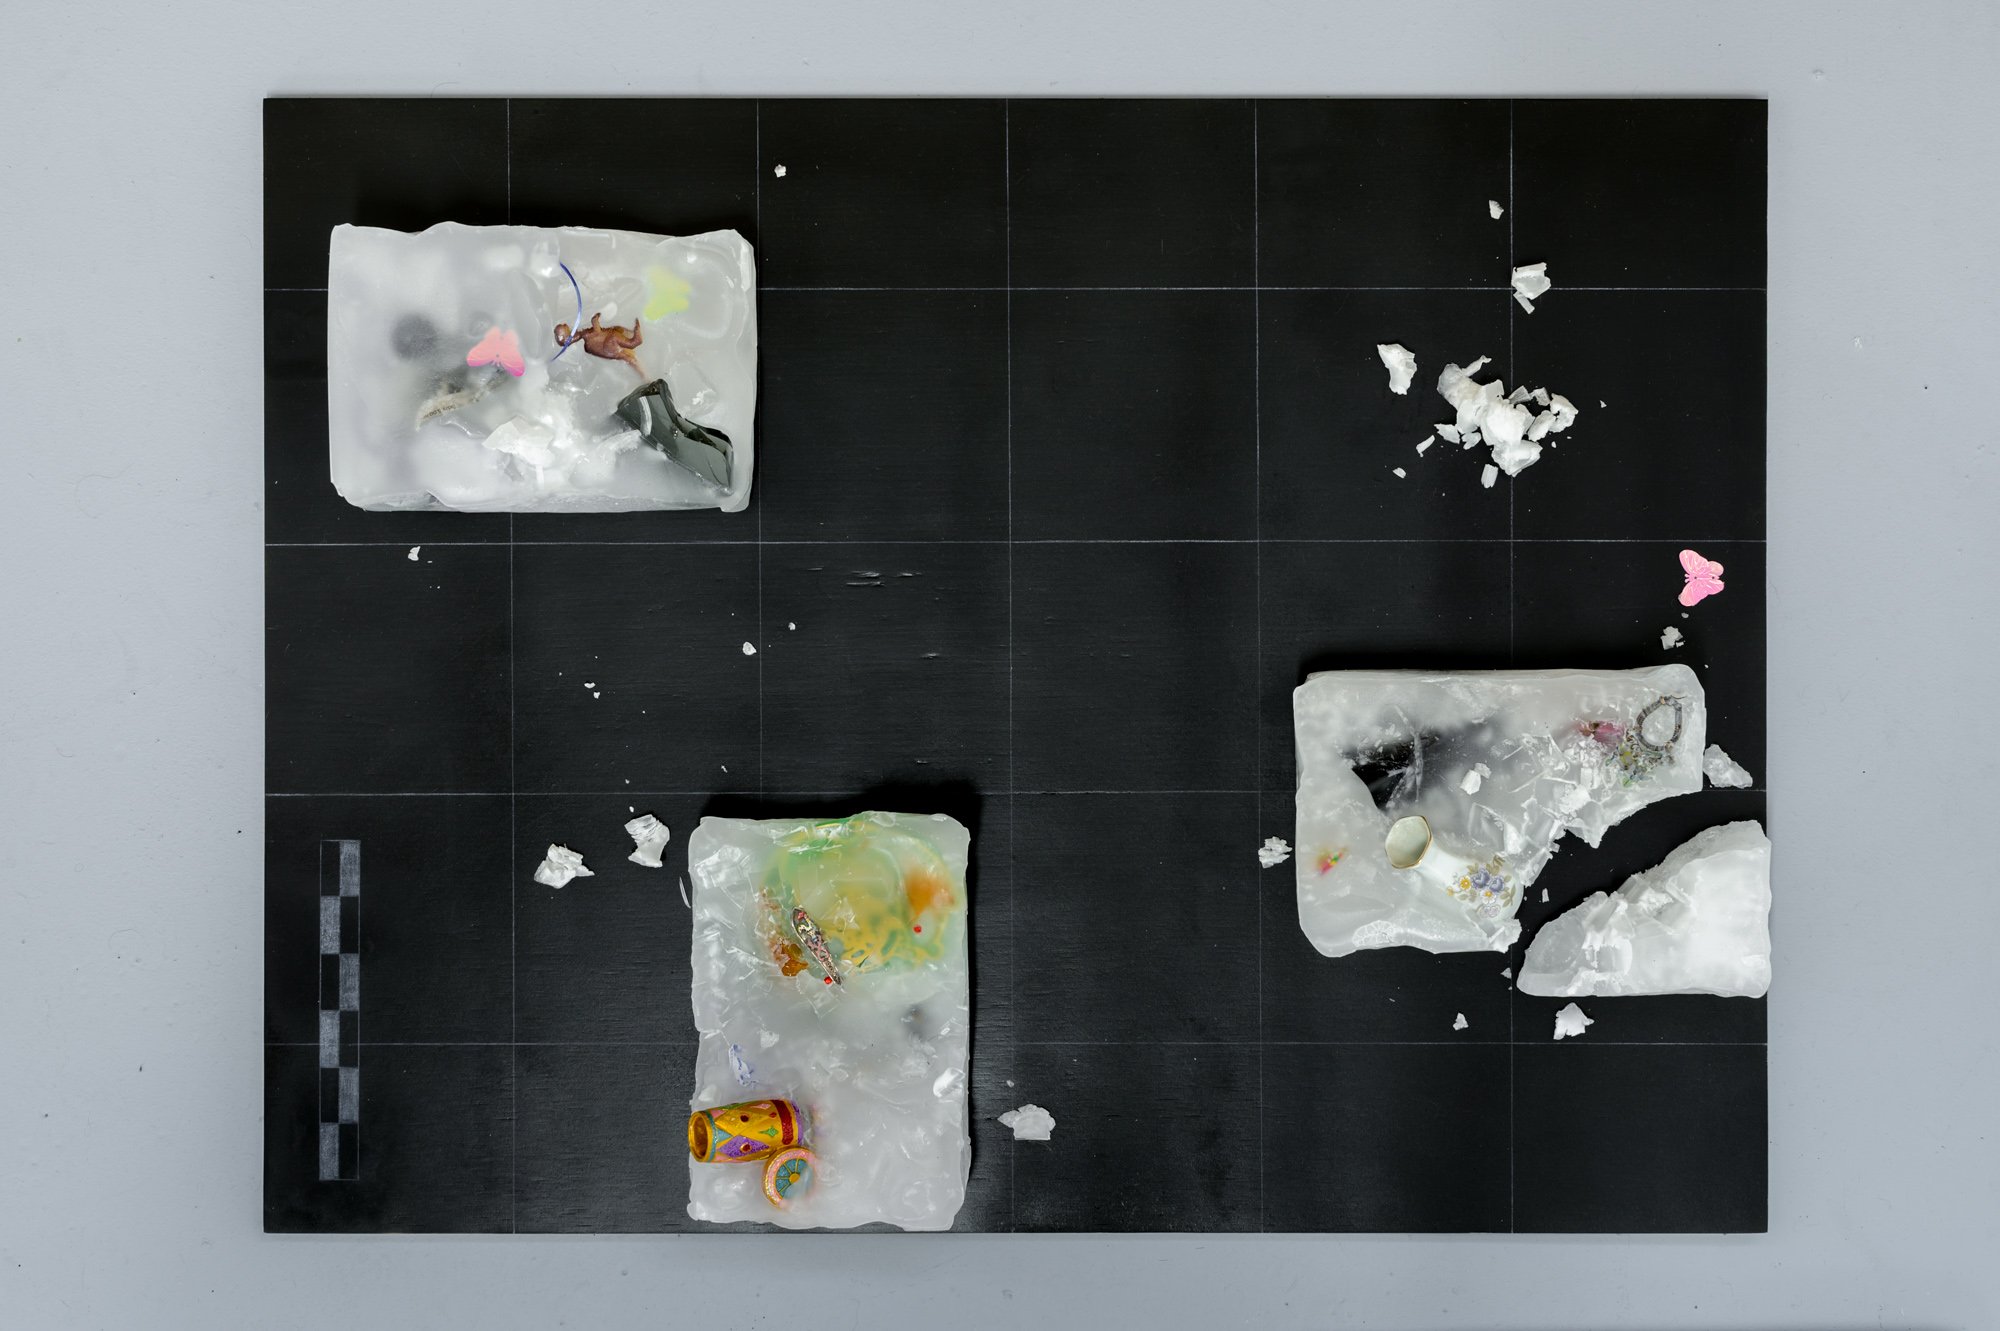   site (disarray) , 2022   Plywood board, paraffin wax, pencil, baking tray, various found objects. Base measures 60 x 80 cms.    